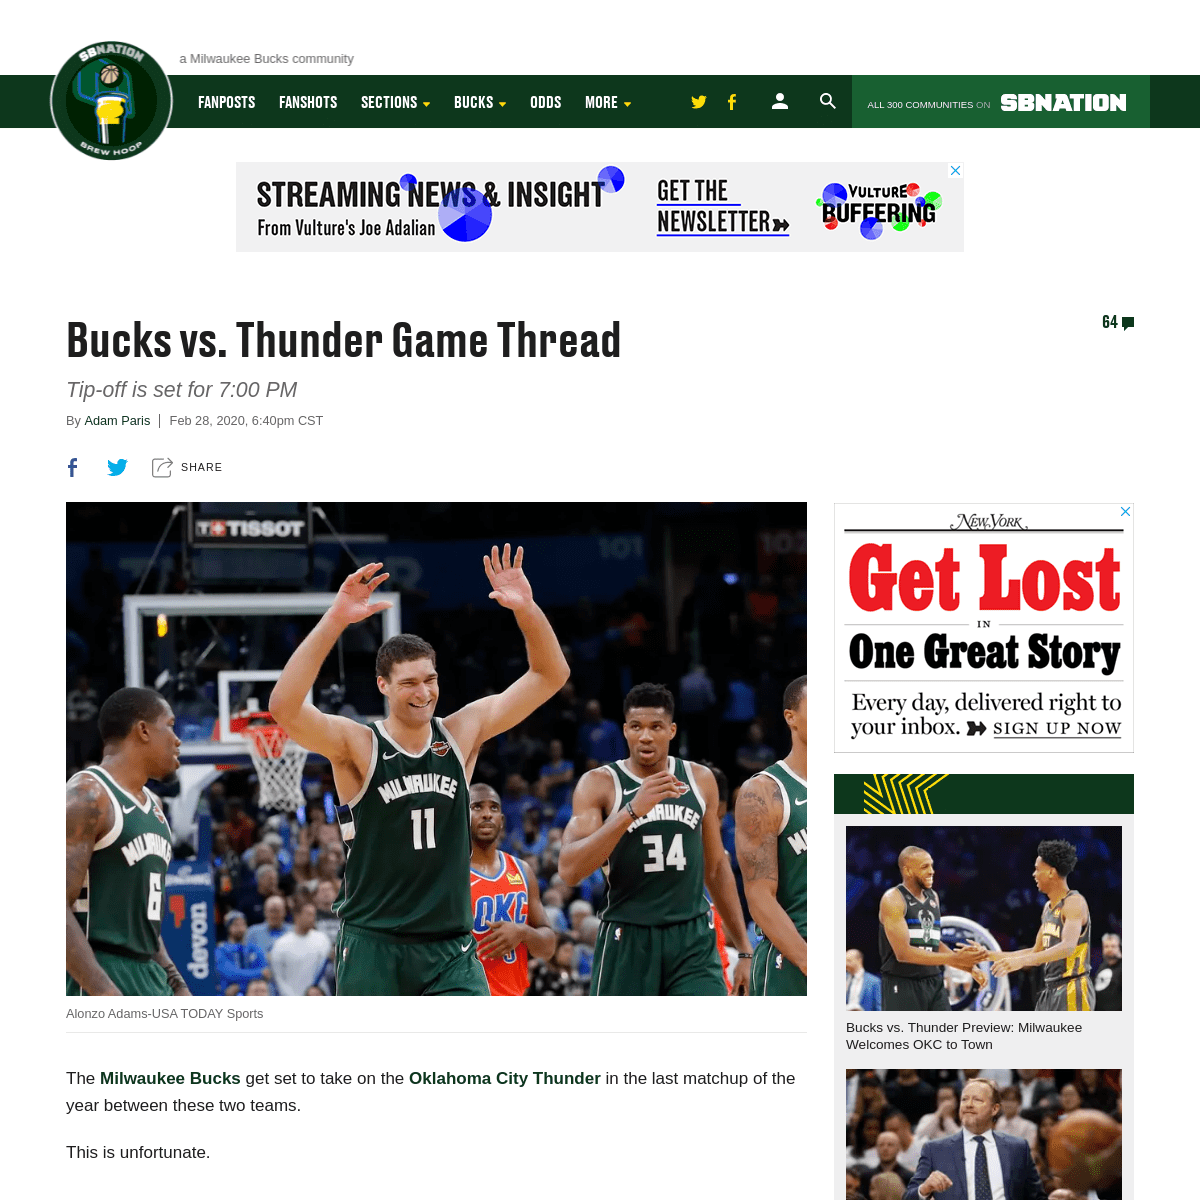 A complete backup of www.brewhoop.com/2020/2/28/21156875/bucks-vs-thunder-game-thread